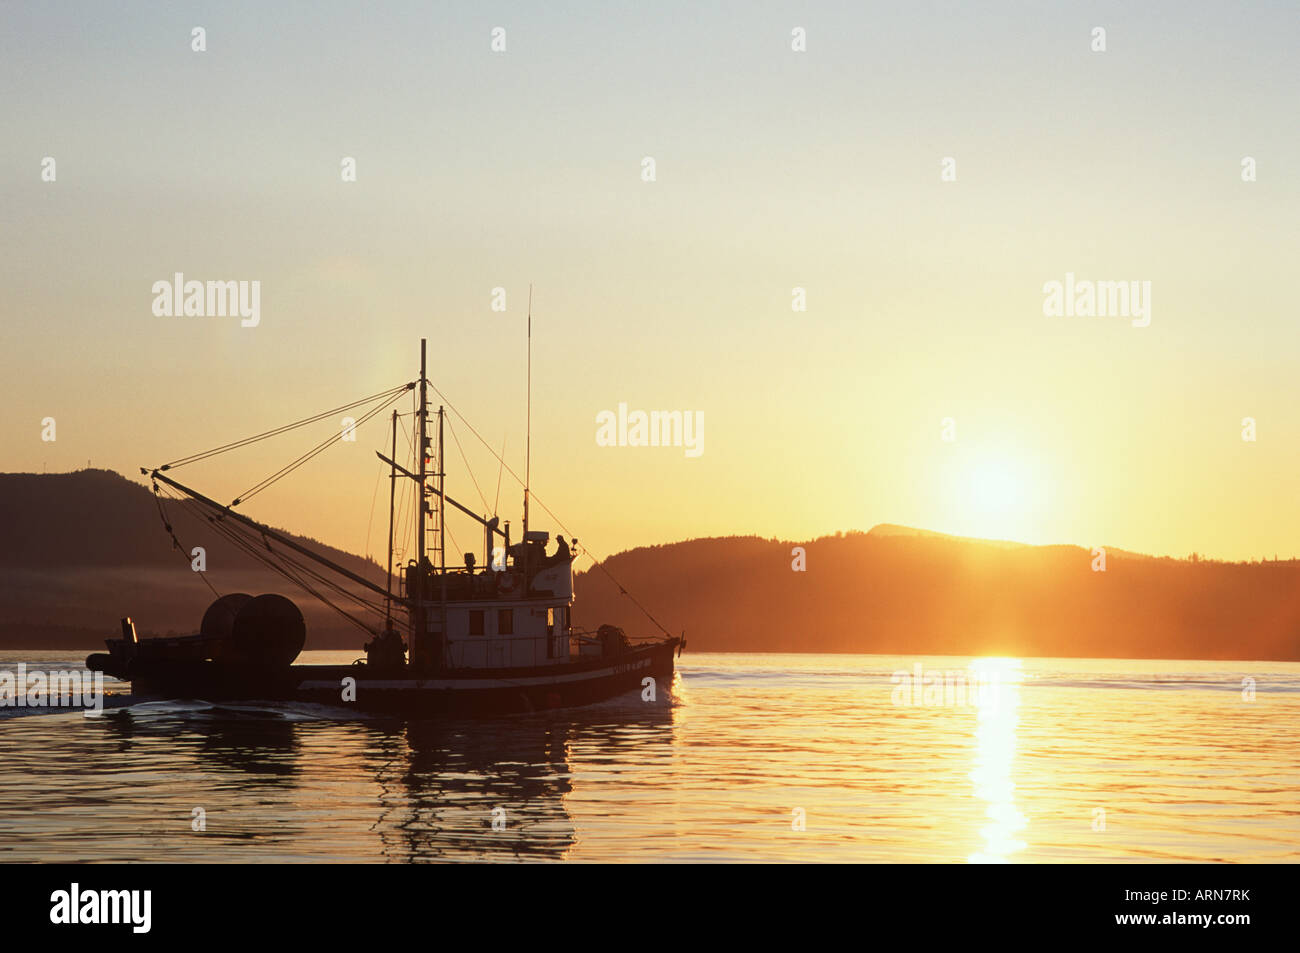 Vancouver Island commercial fishboat in sunset, British Columbia, Canada Stock Photo